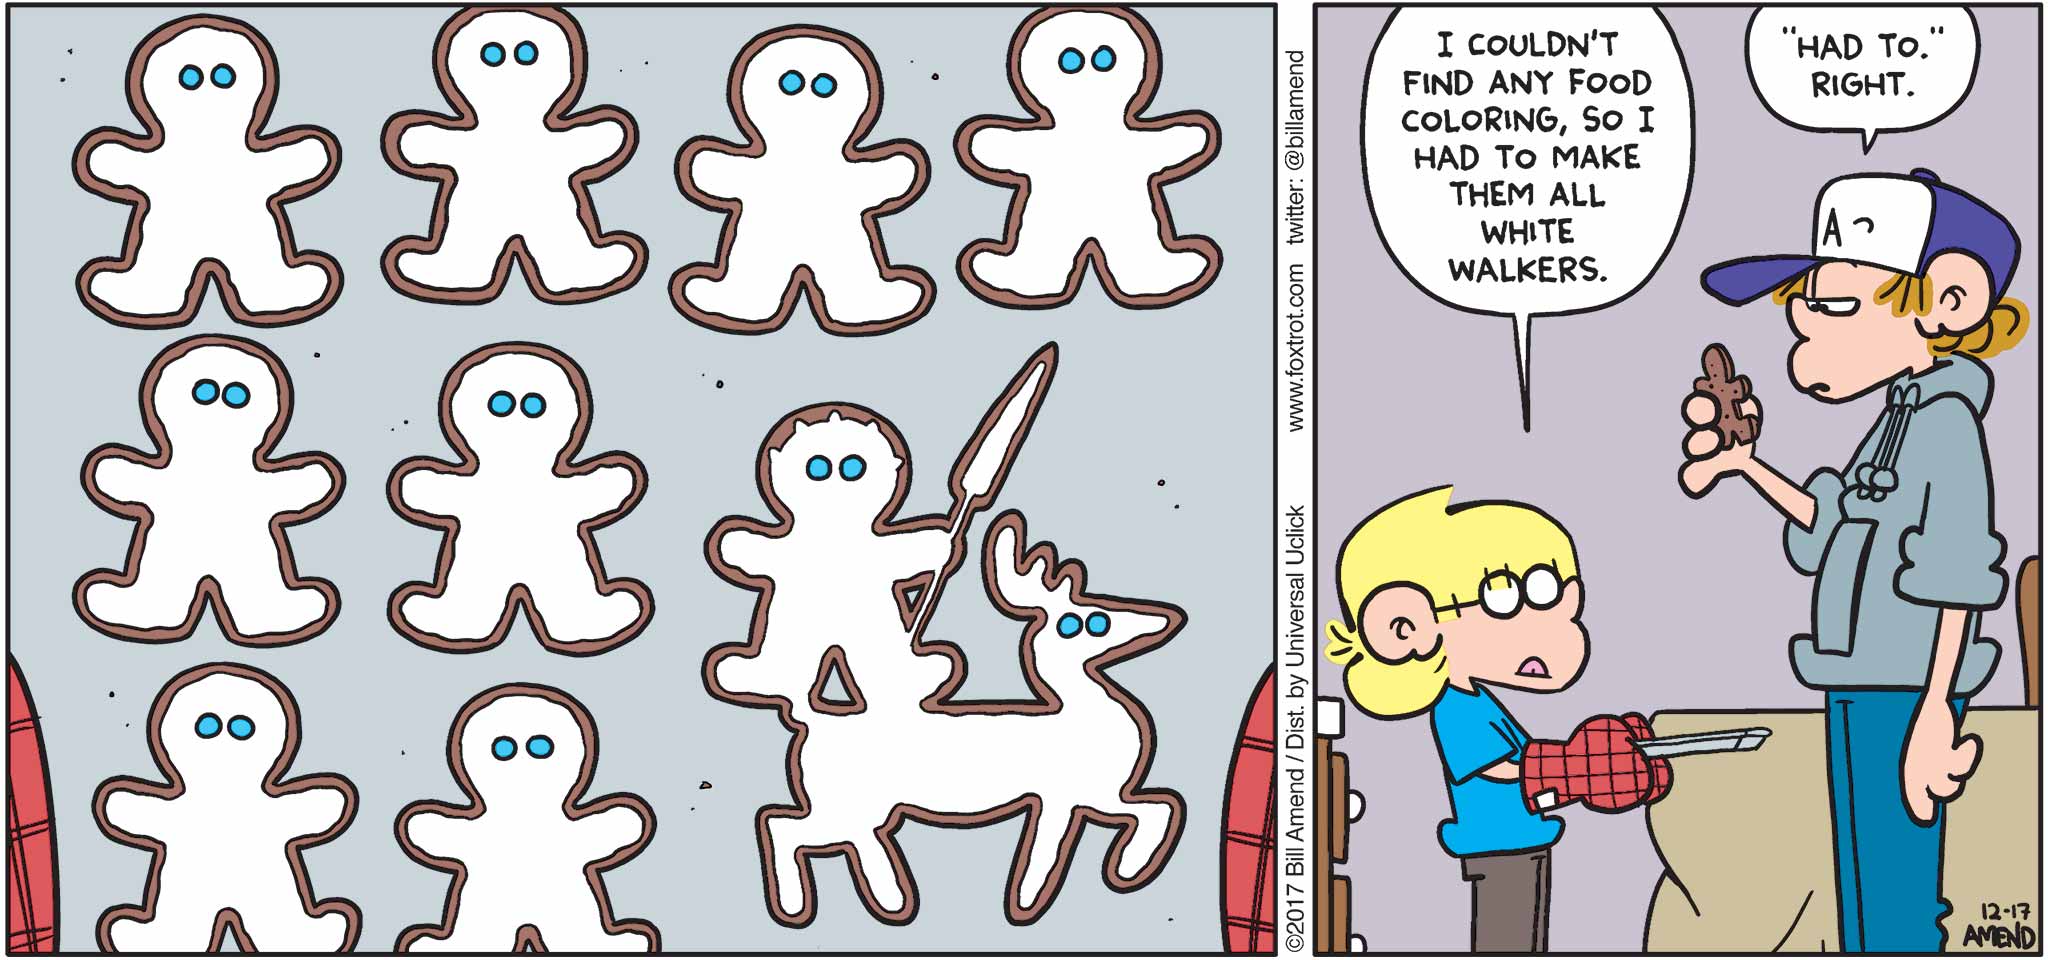 FoxTrot by Bill Amend - "Freeze Before Serving" published December 17, 2017 - Jason says: I couldn't find any food coloring, so I had to make them all White Walkers. Peter says: "Had to." Right.